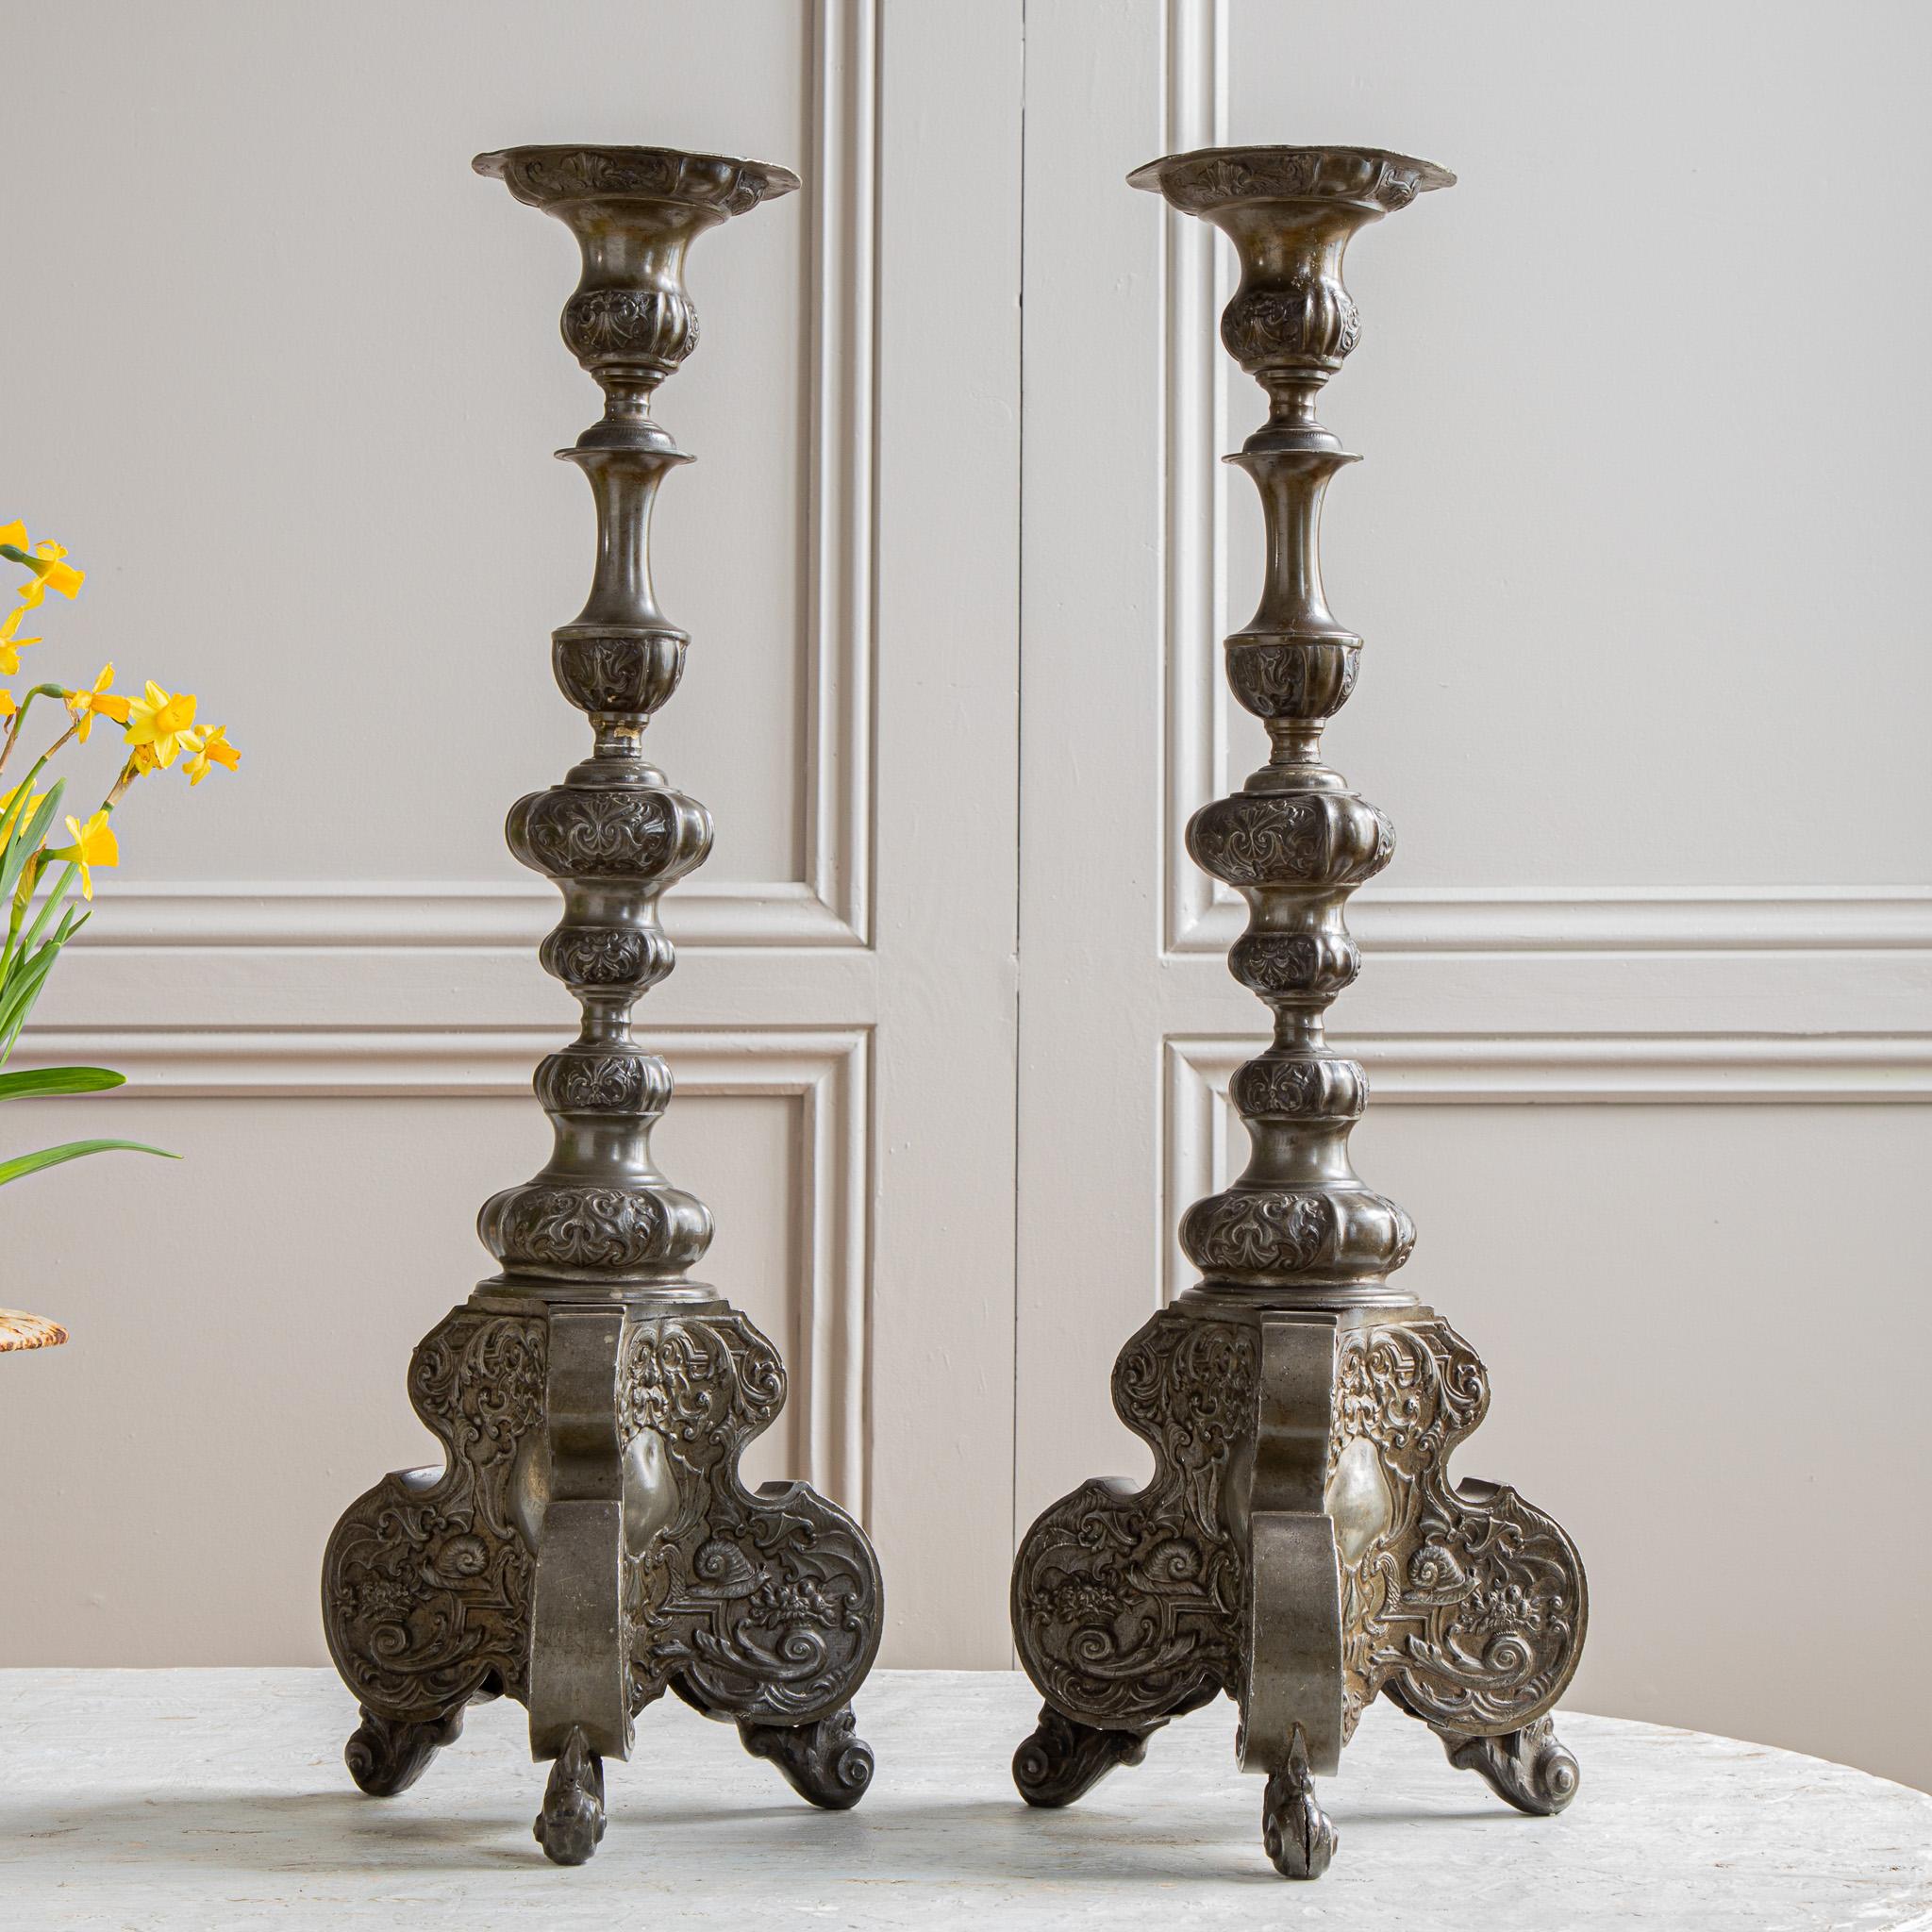 19th Century Renaissance Style Pewter Candle Holders From Towie Barclay Castle For Sale 2